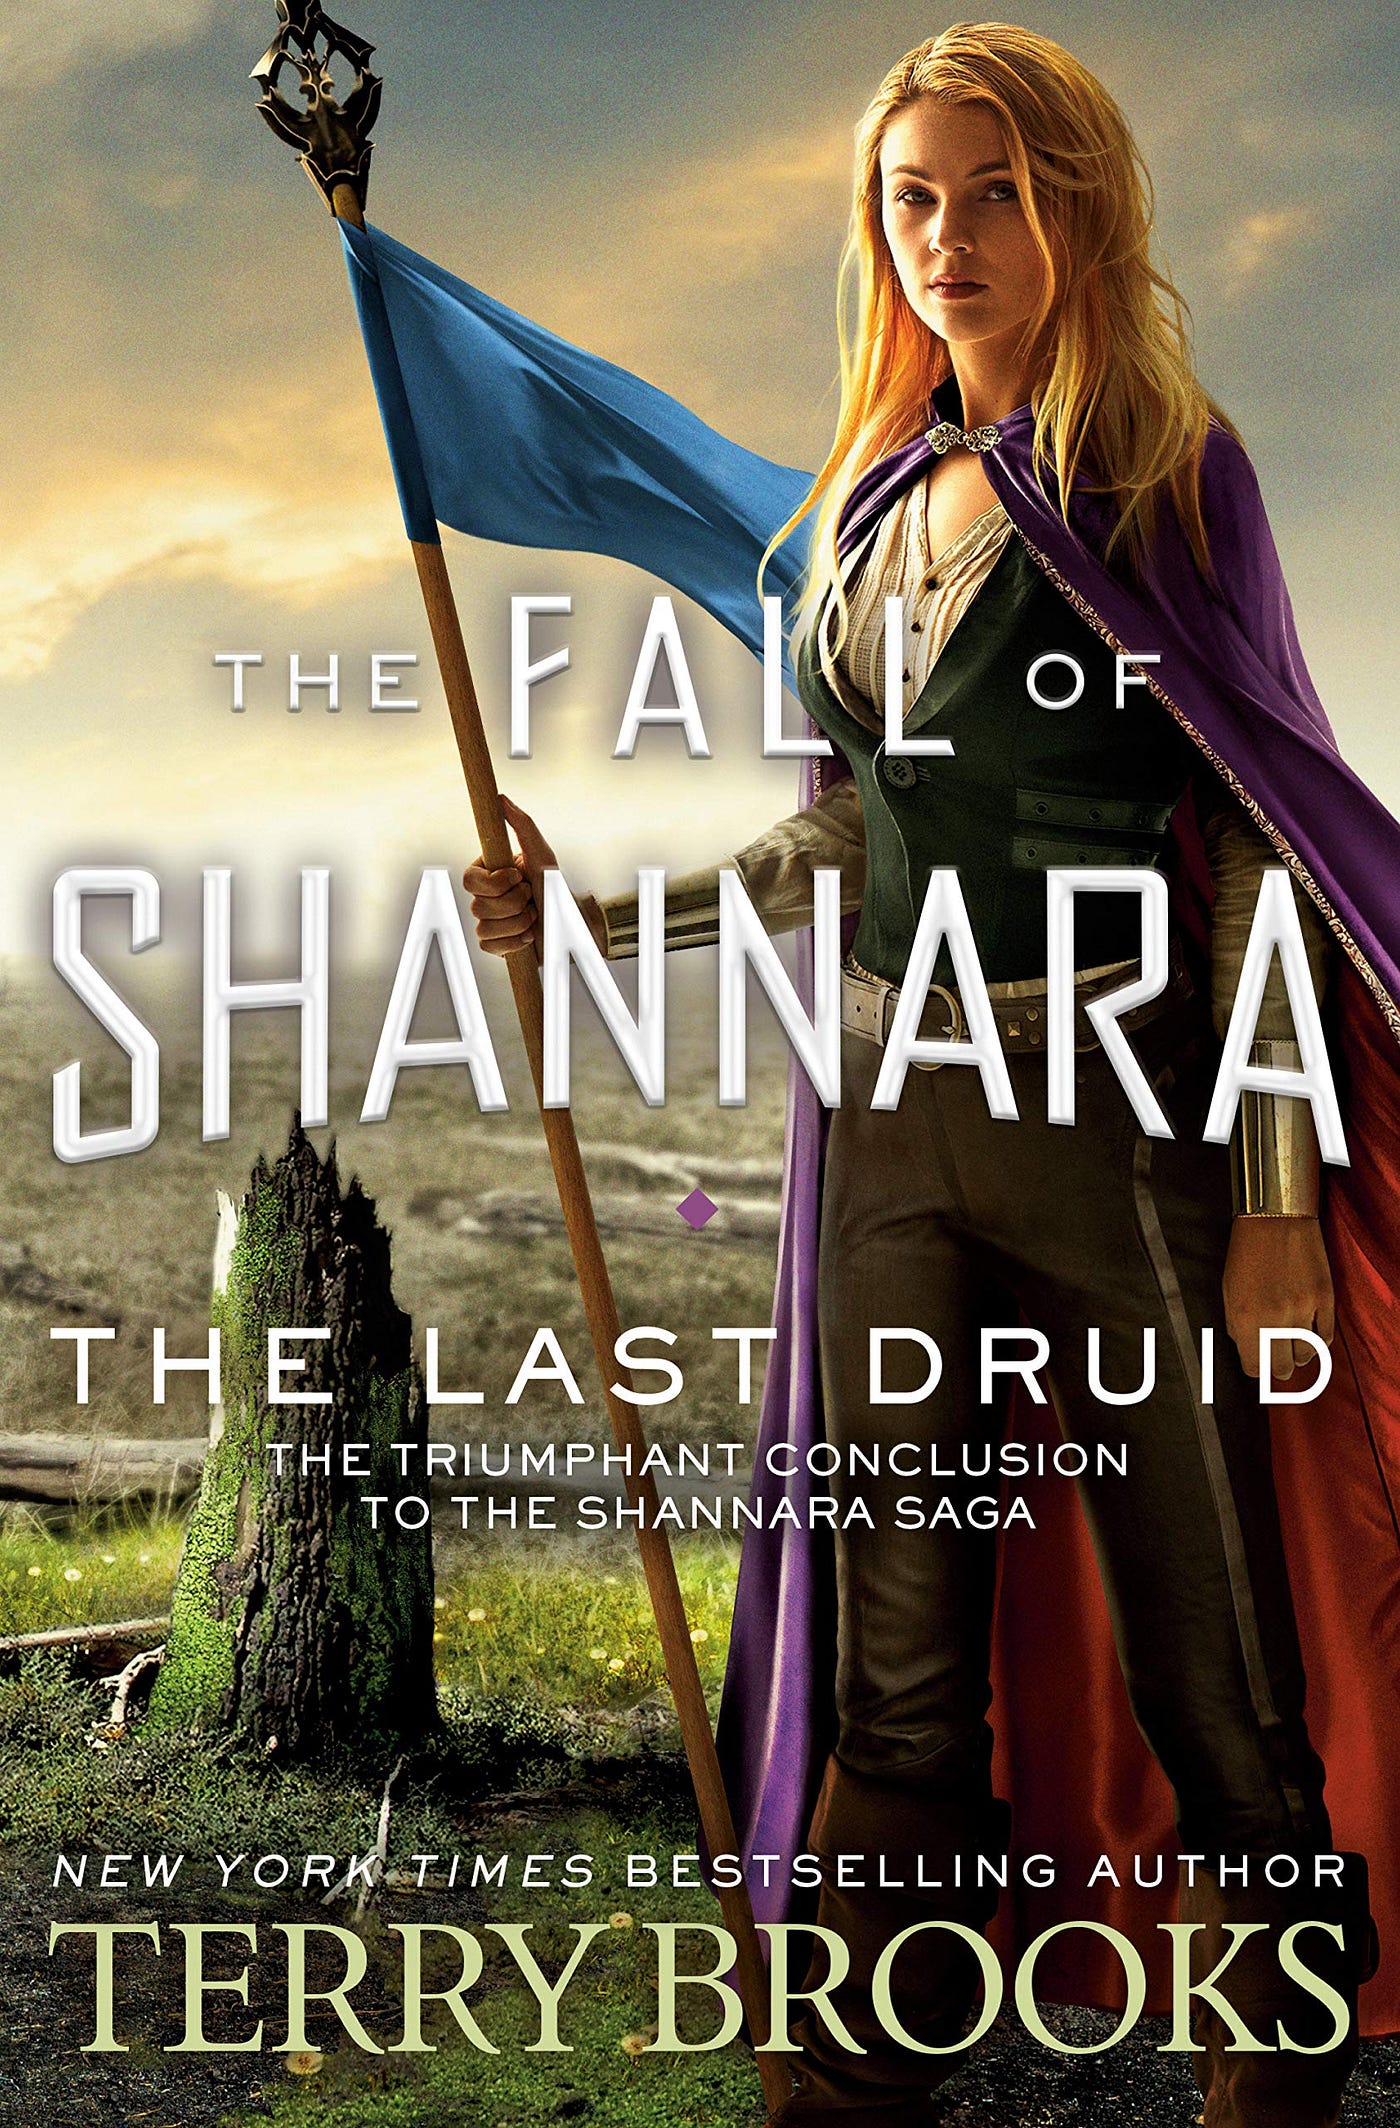 Book Review: “The Last Druid”. Terry Brooks' new book brings his… | by Dr.  Thomas J. West III | Darcy and Winters | Medium